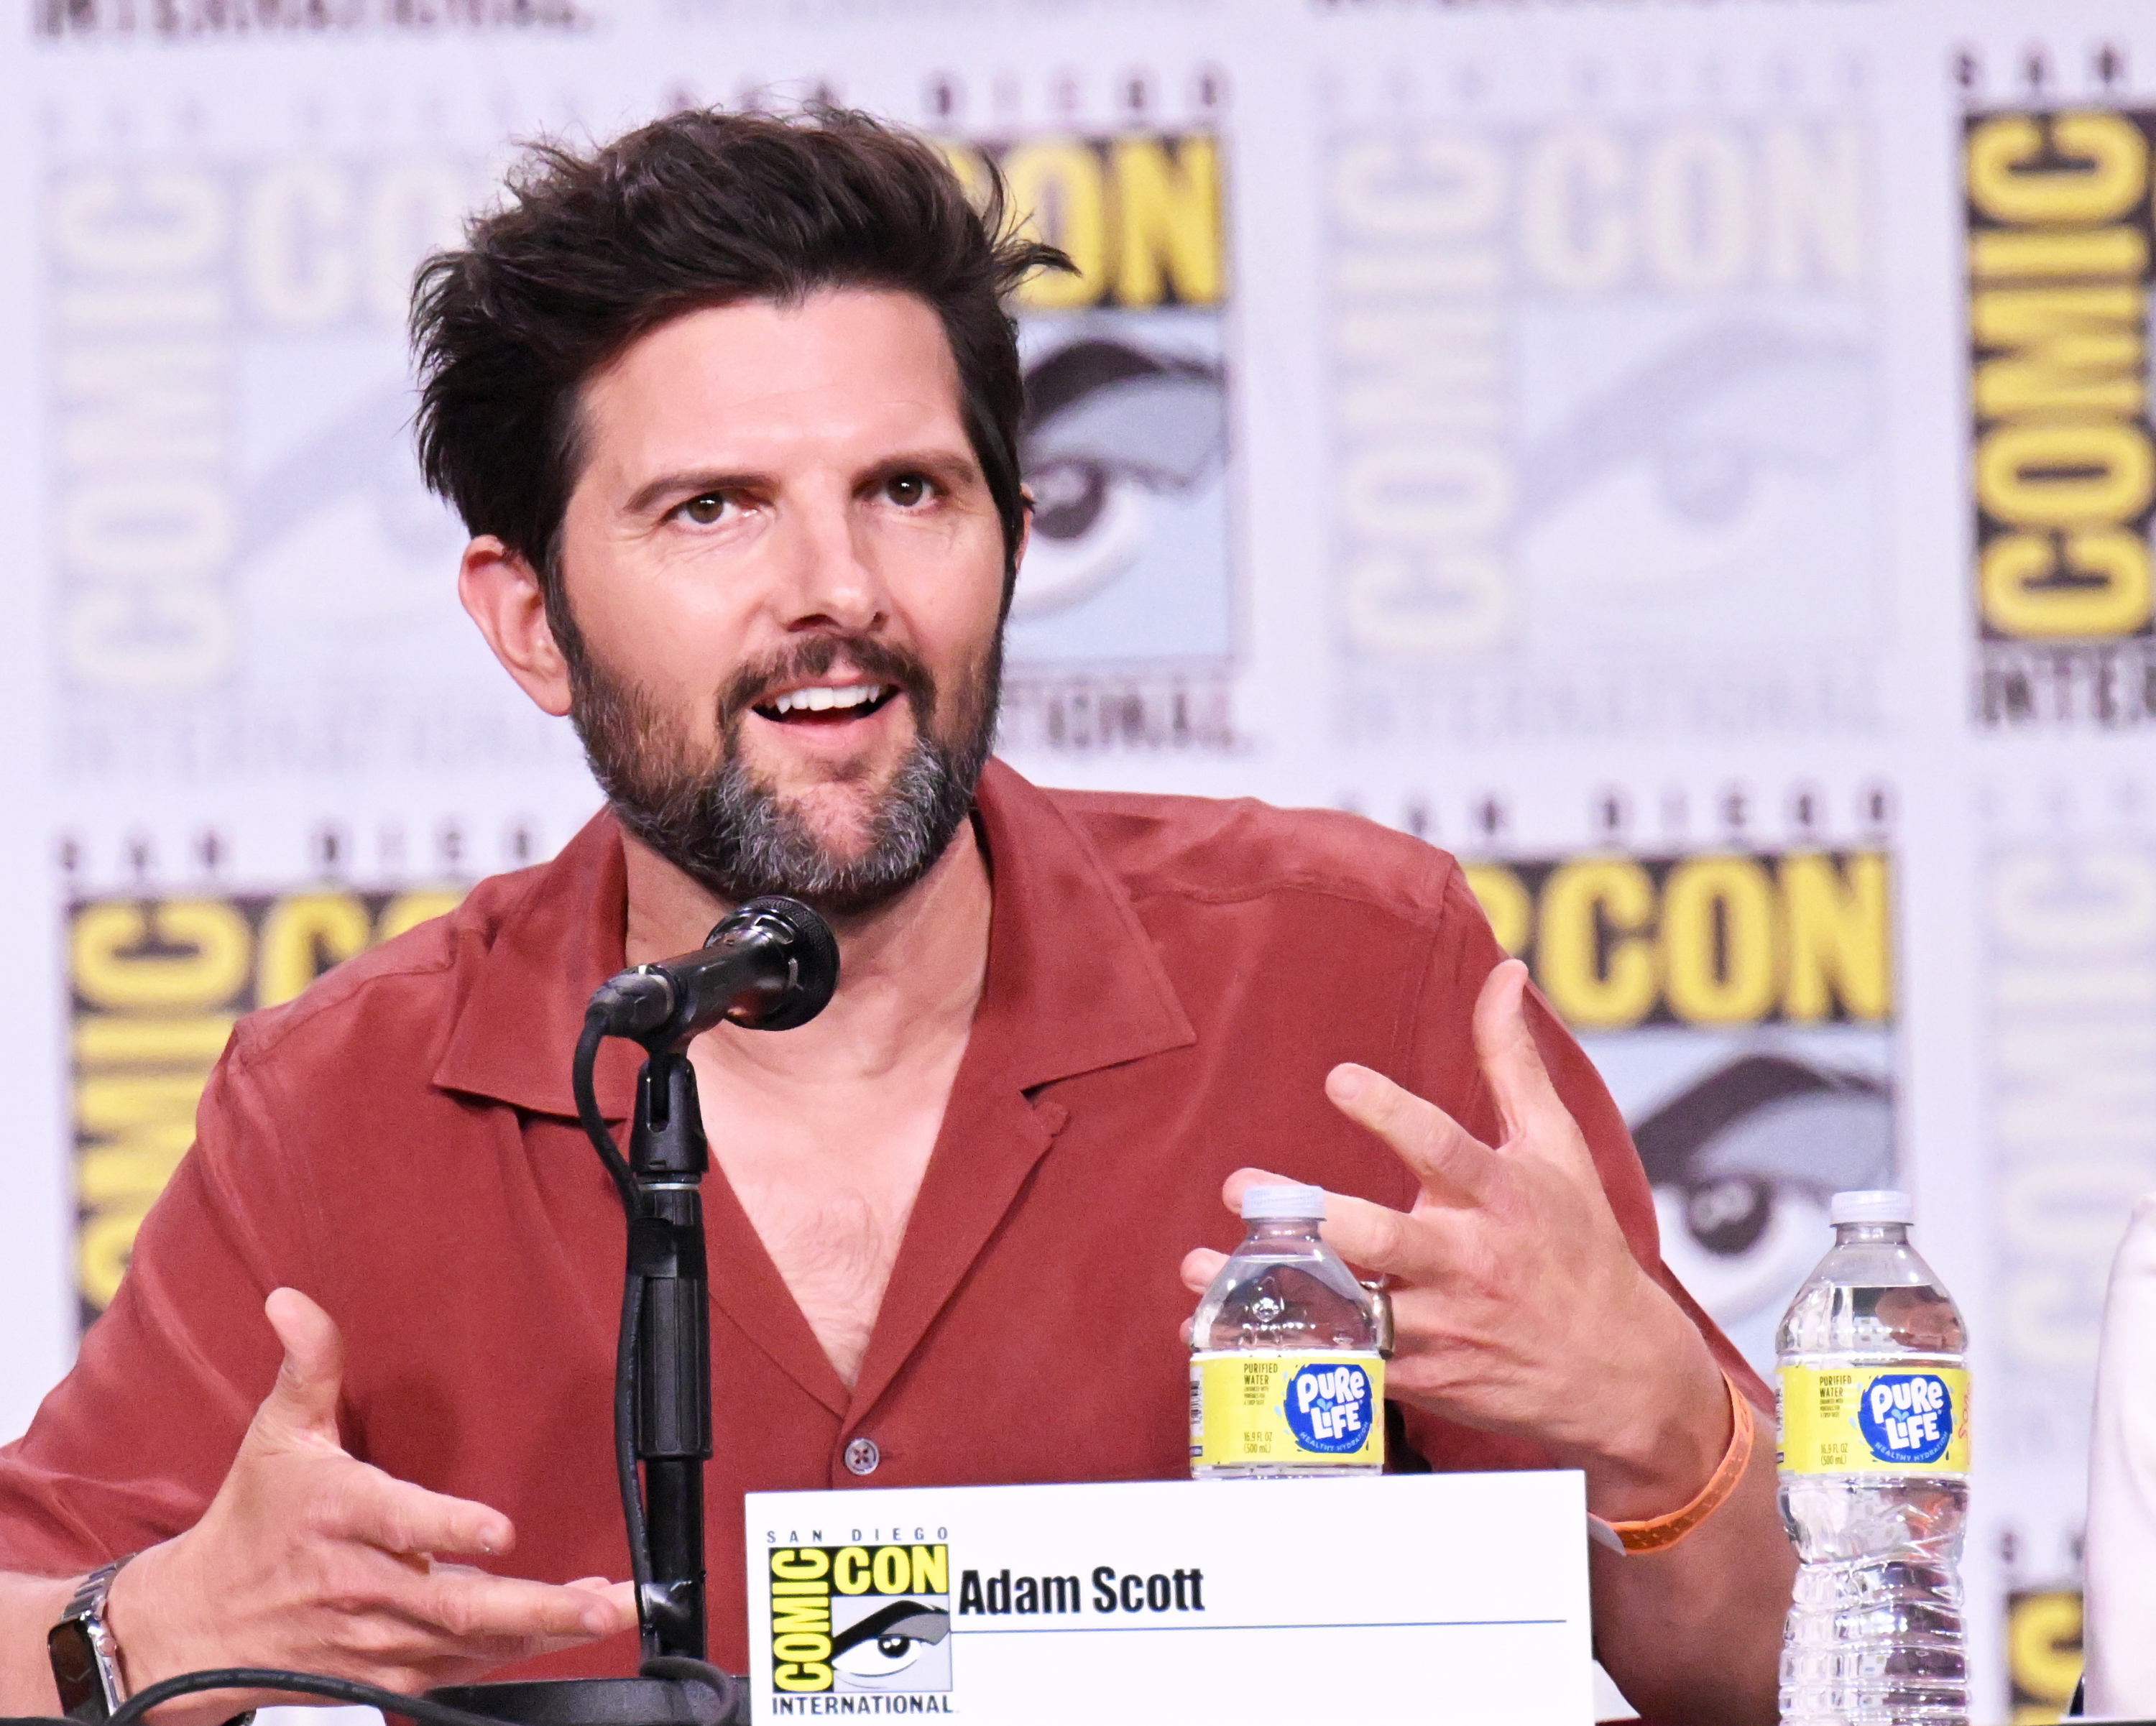 Adam Scott speaks at the "Severance" panel at the San Diego Convention Center on July 21, 2022, in San Diego, California. | Source: Getty Images